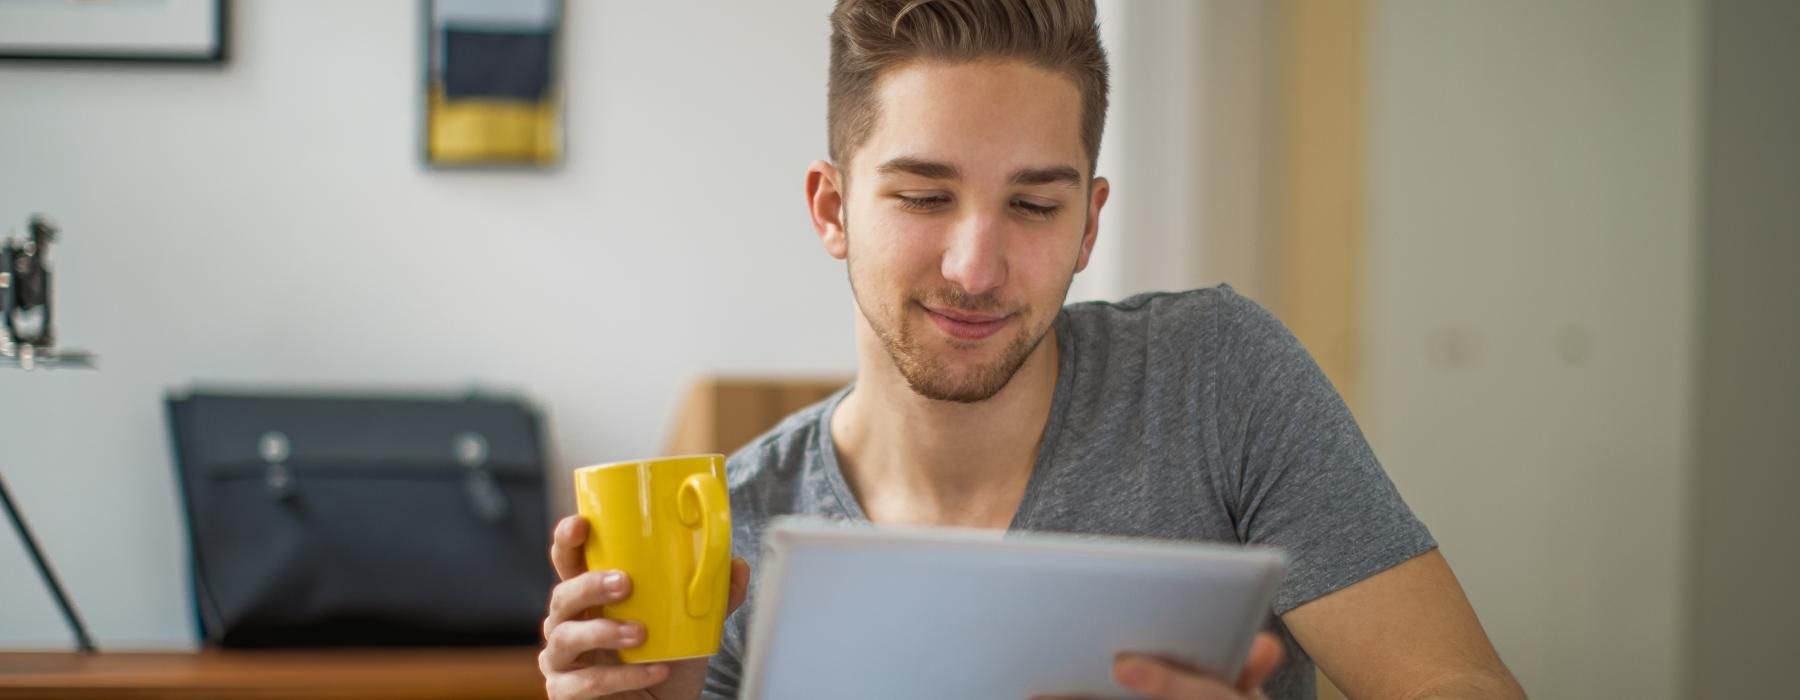 man holding a coffee cup and looking at a laptop